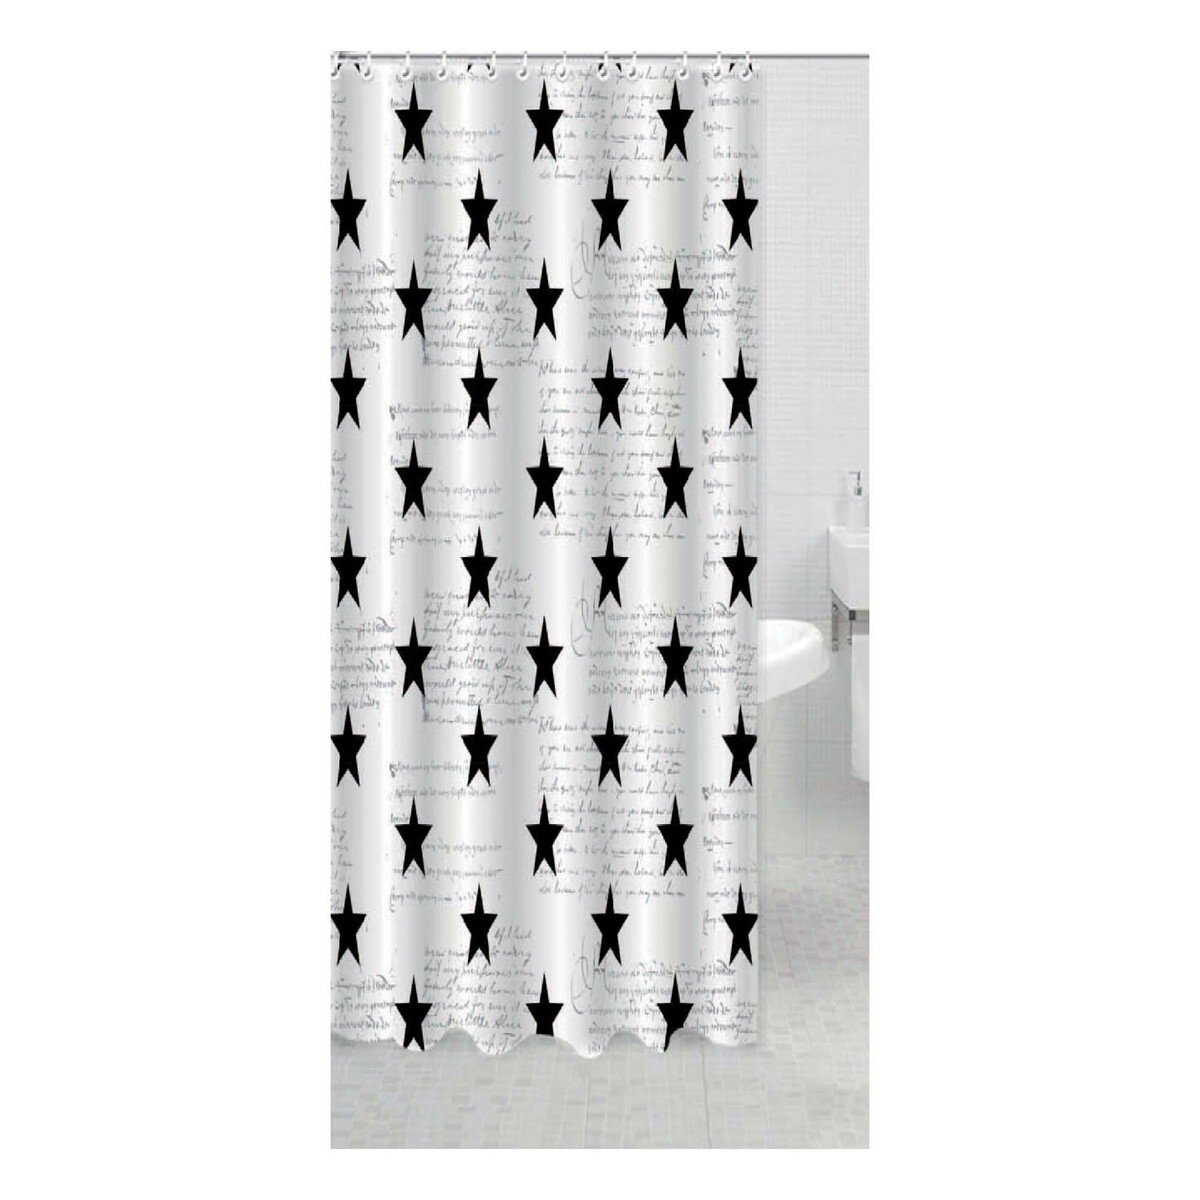 Maple Leaf Printed Peva Shower Curtain With 12 Plastic Hooks 180x180cm Assorted Designs